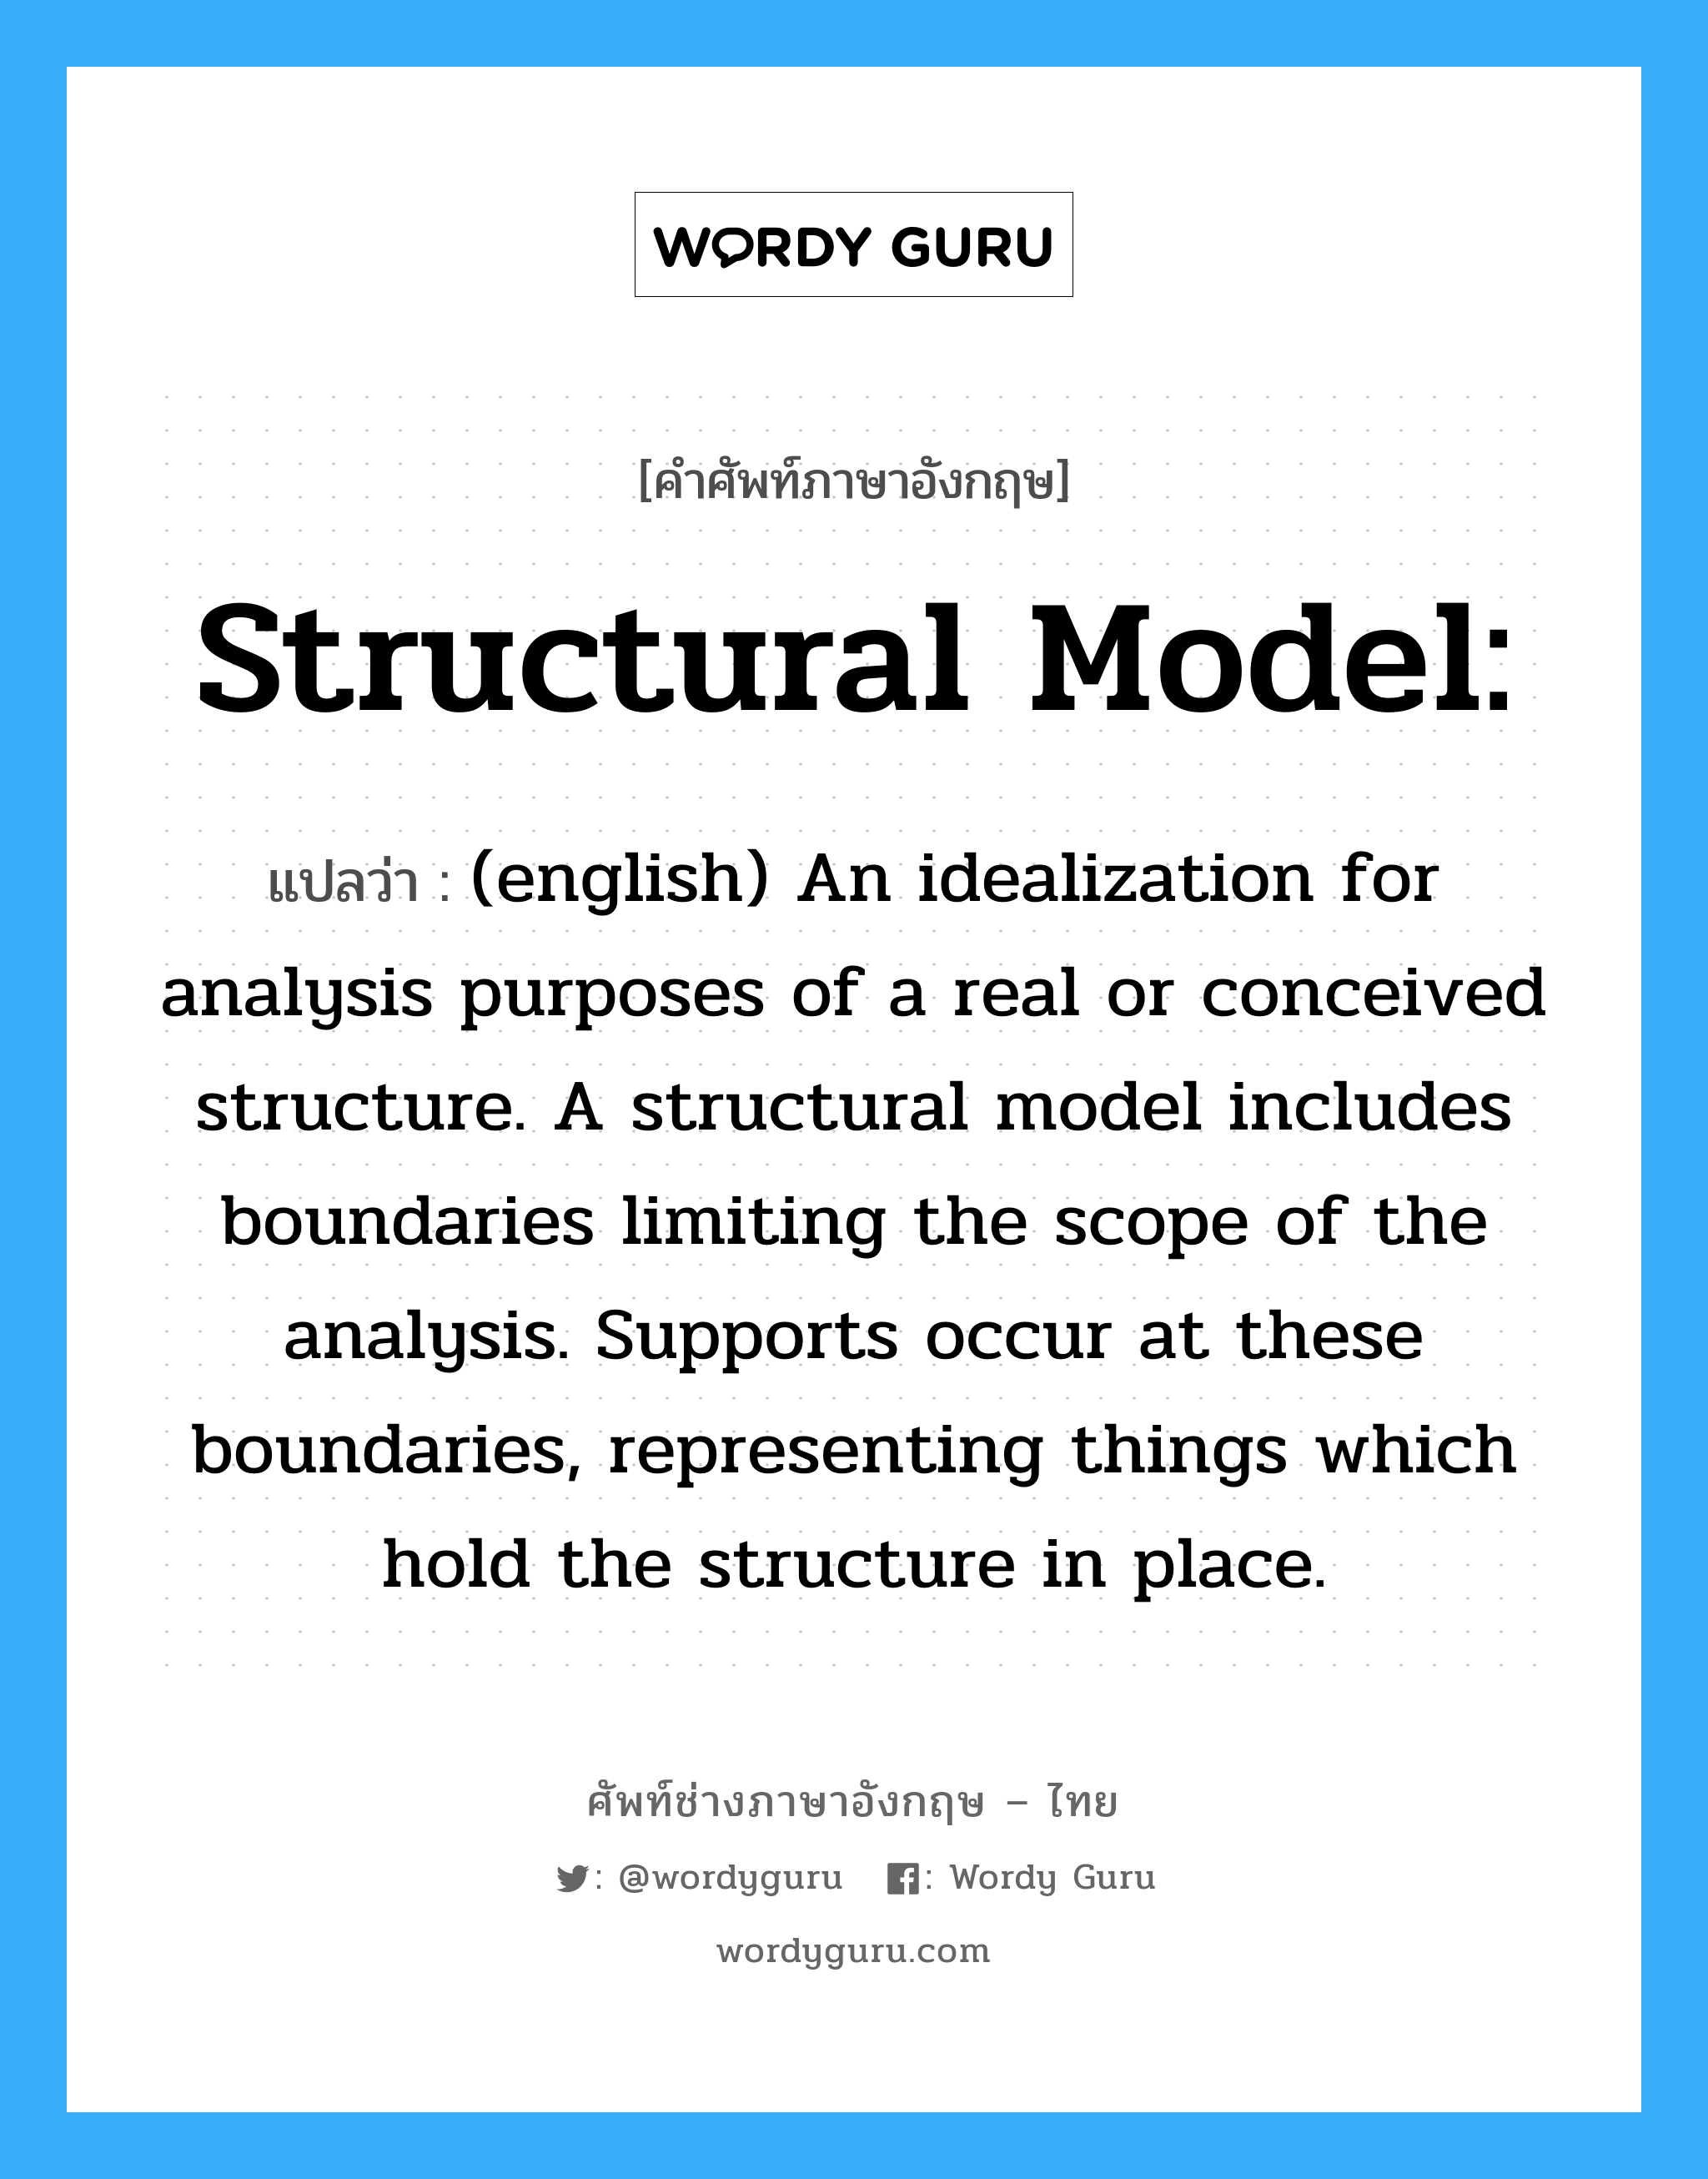 Structural model: แปลว่า?, คำศัพท์ช่างภาษาอังกฤษ - ไทย Structural model: คำศัพท์ภาษาอังกฤษ Structural model: แปลว่า (english) An idealization for analysis purposes of a real or conceived structure. A structural model includes boundaries limiting the scope of the analysis. Supports occur at these boundaries, representing things which hold the structure in place.